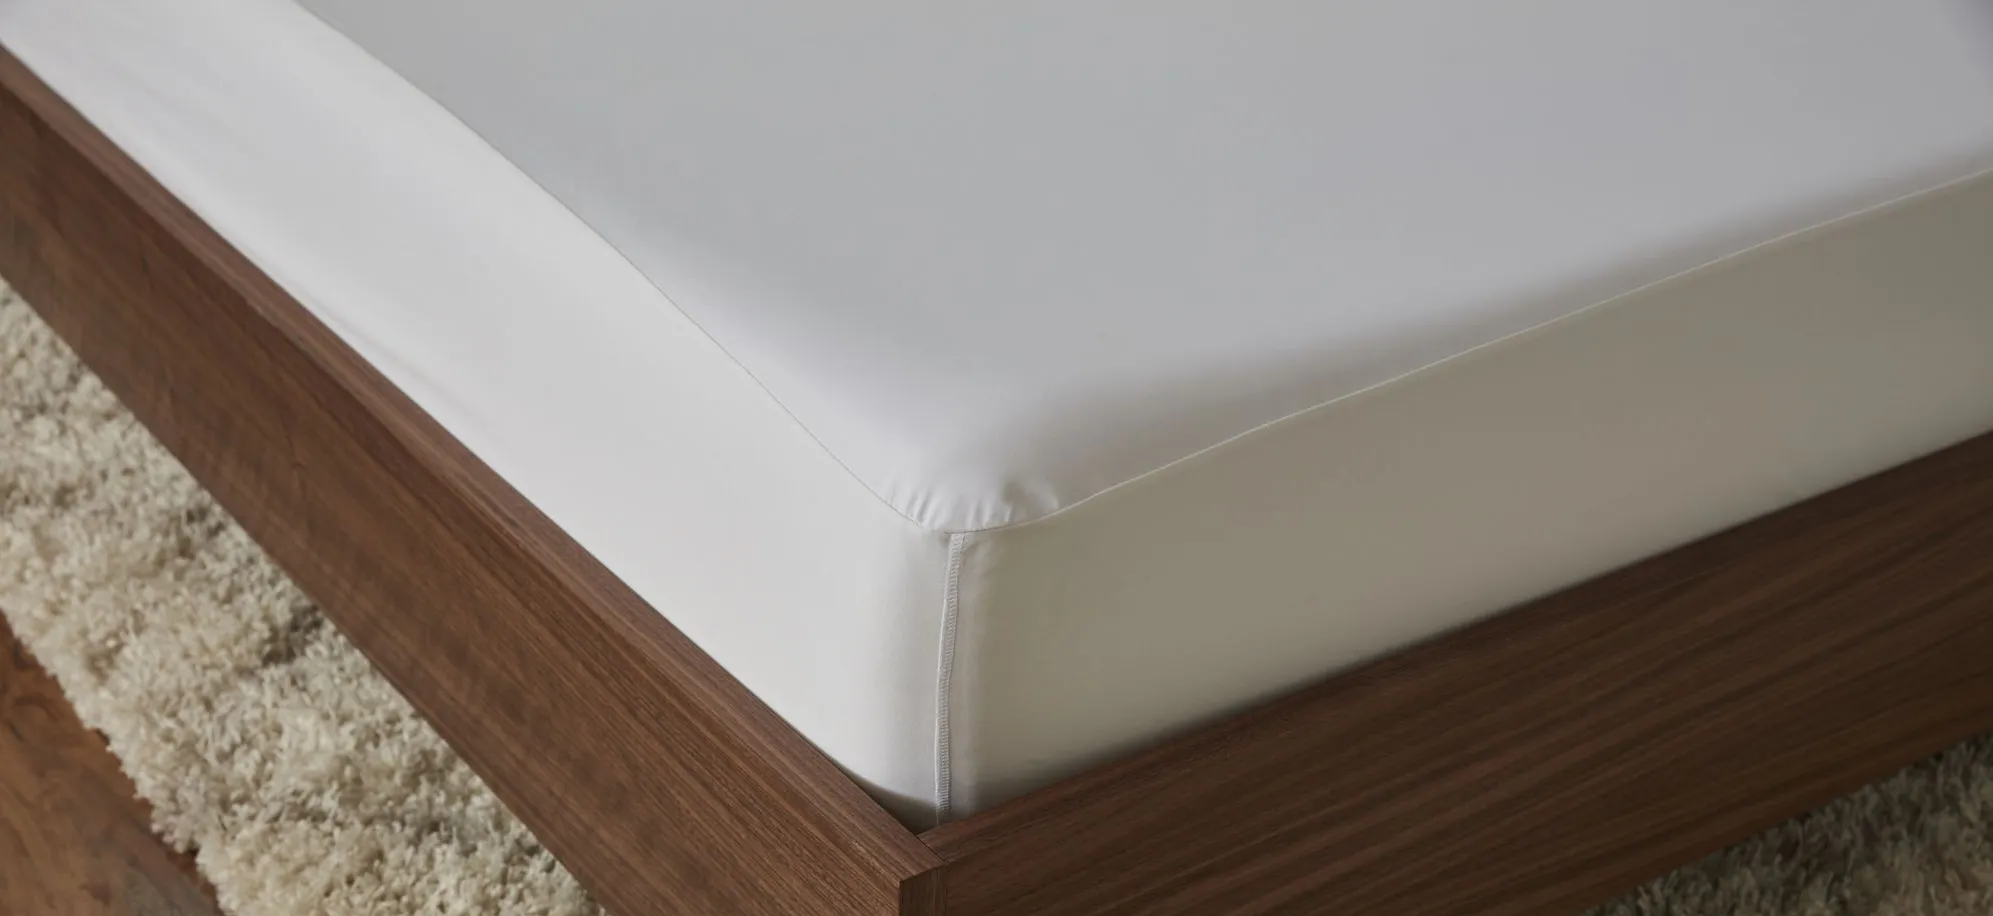 Elevated Performance by Sheex Mattress Protector in Bright White by Sheex Inc